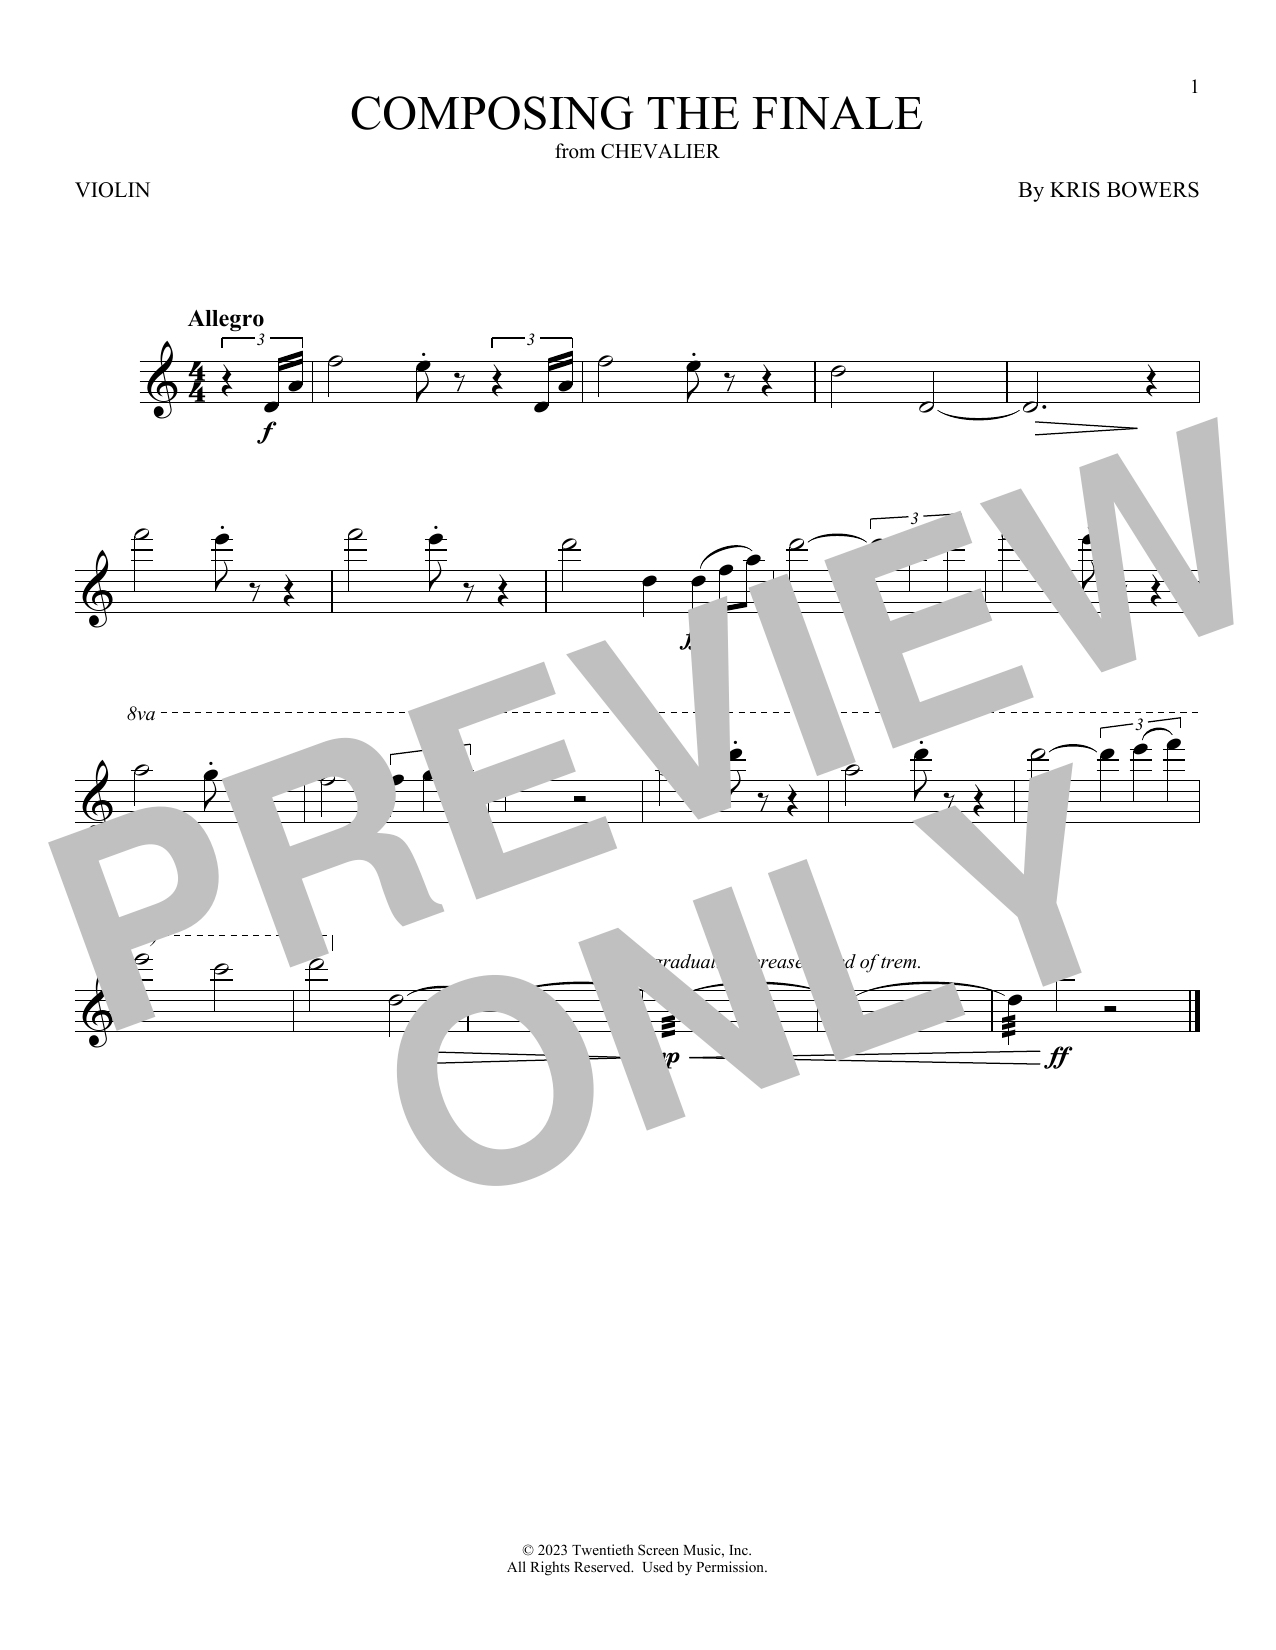 Download Kris Bowers Composing The Finale (from Chevalier) Sheet Music